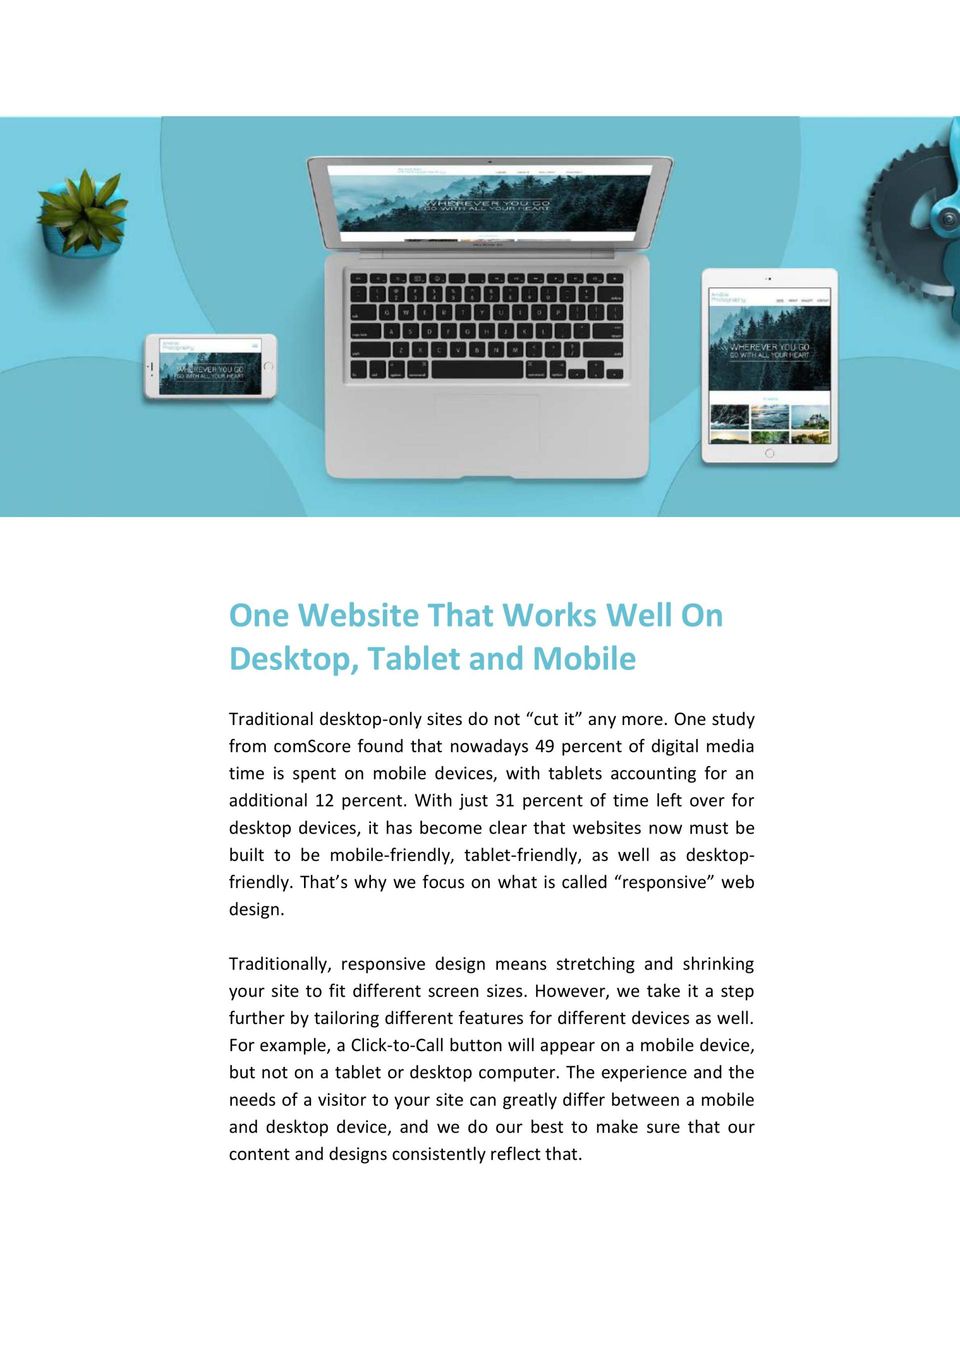 Why Update? One website that works well on desktop, tablet and mobile